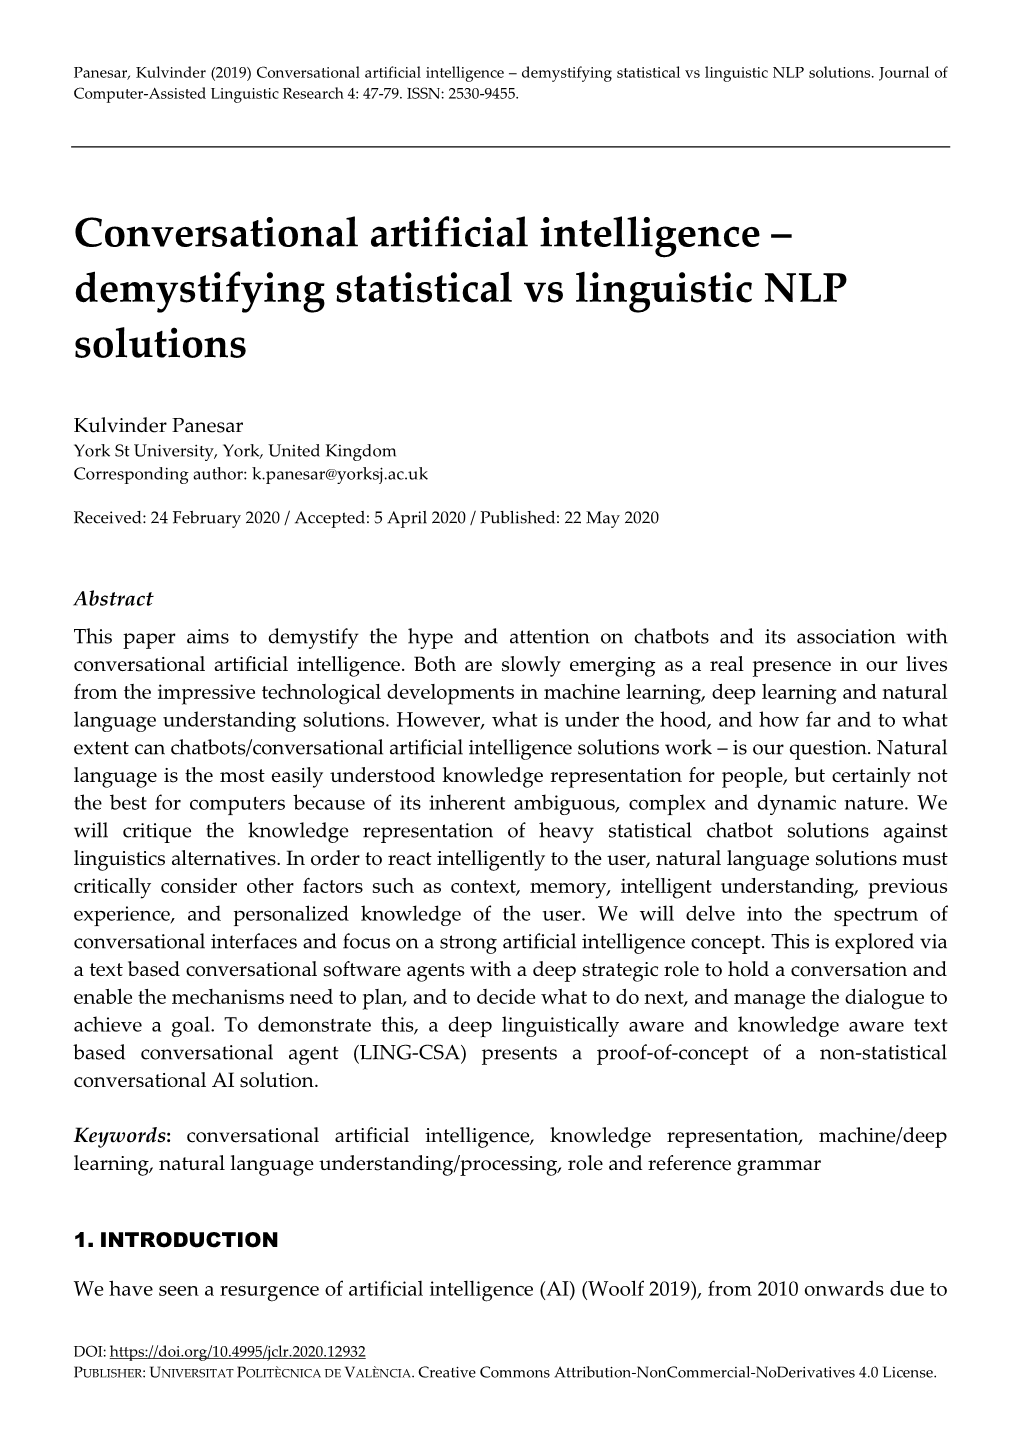 Conversational Artificial Intelligence – Demystifying Statistical Vs Linguistic NLP Solutions